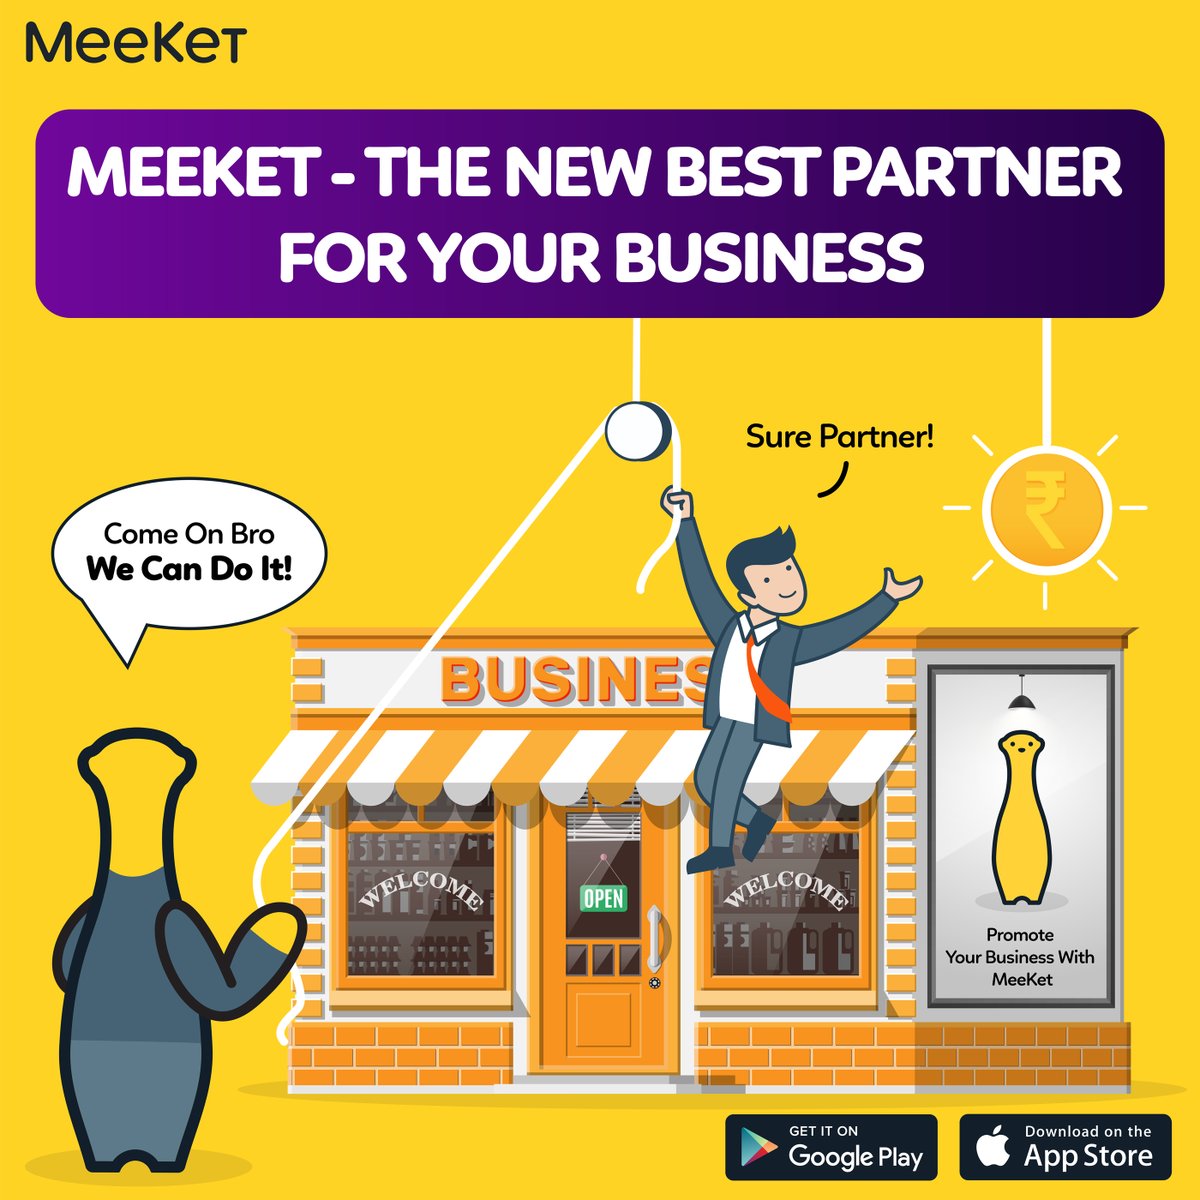 #MeeKet The New Busienss Partner the make your brand reach across the Local Market. Get unbelievable Organic Traffic to your local shops. Download & Install Today.
#sellanything #buy #business #freeadvertisement#MeeKet #chennai
Download App:
play.google.com/store/apps/det…